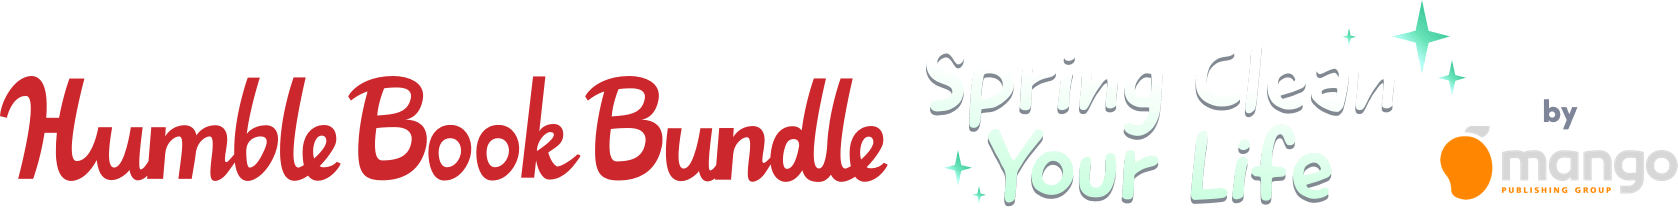 Humble Book Bundle: Spring Clean Your Life by Mango Media